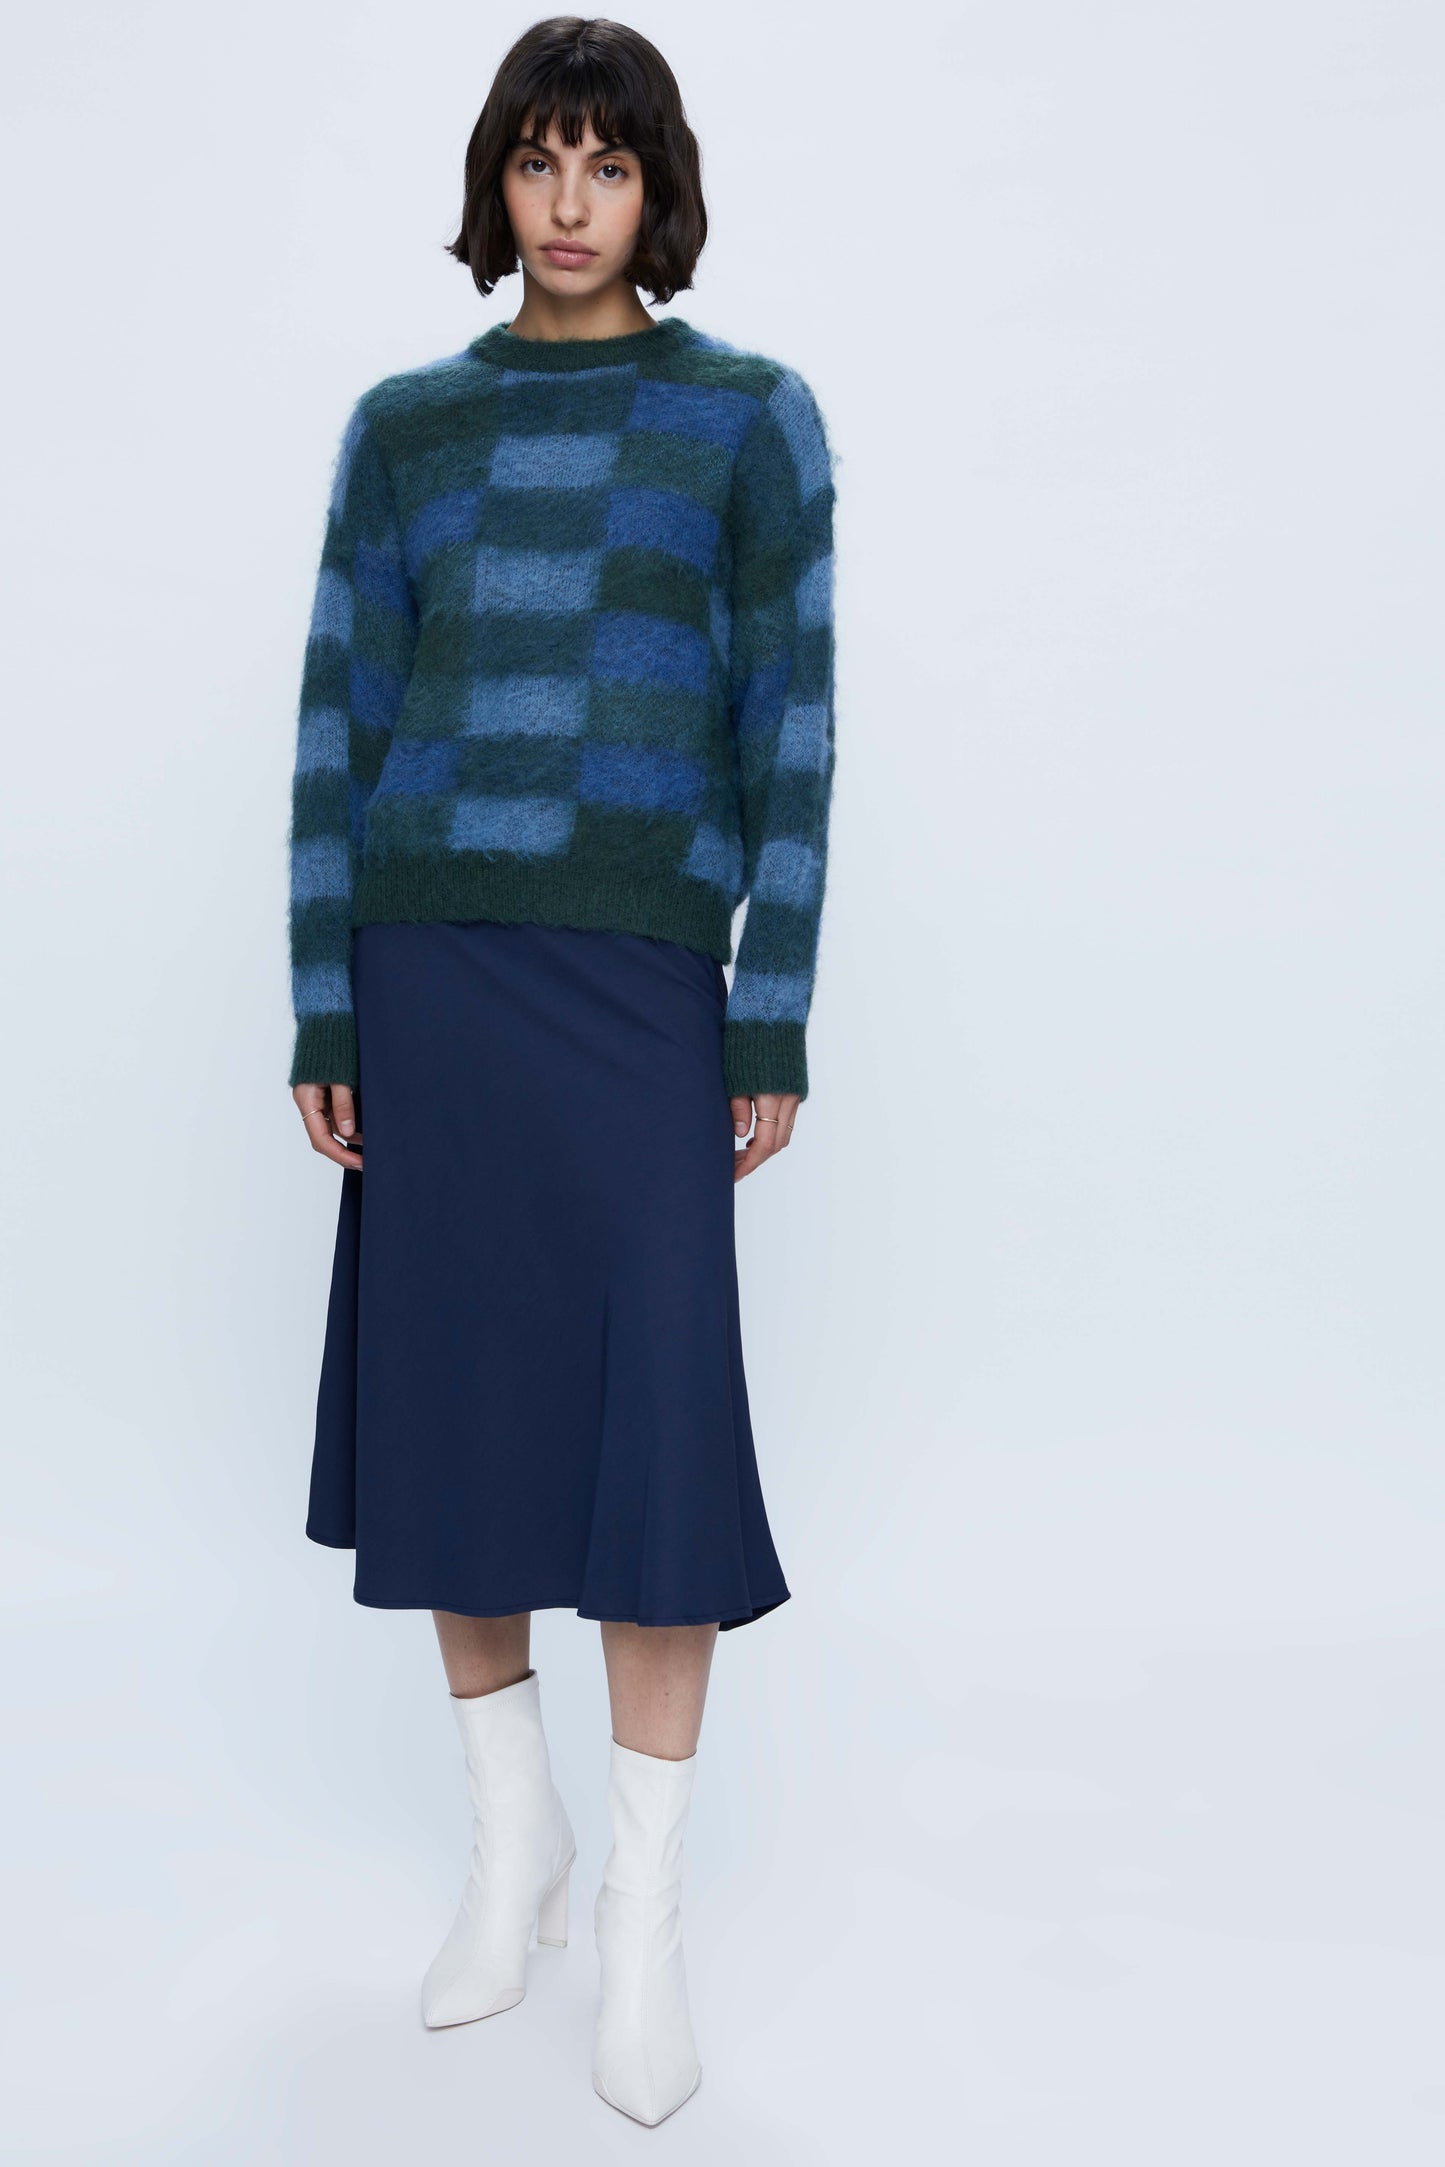 Soft knit sweater with blue check print